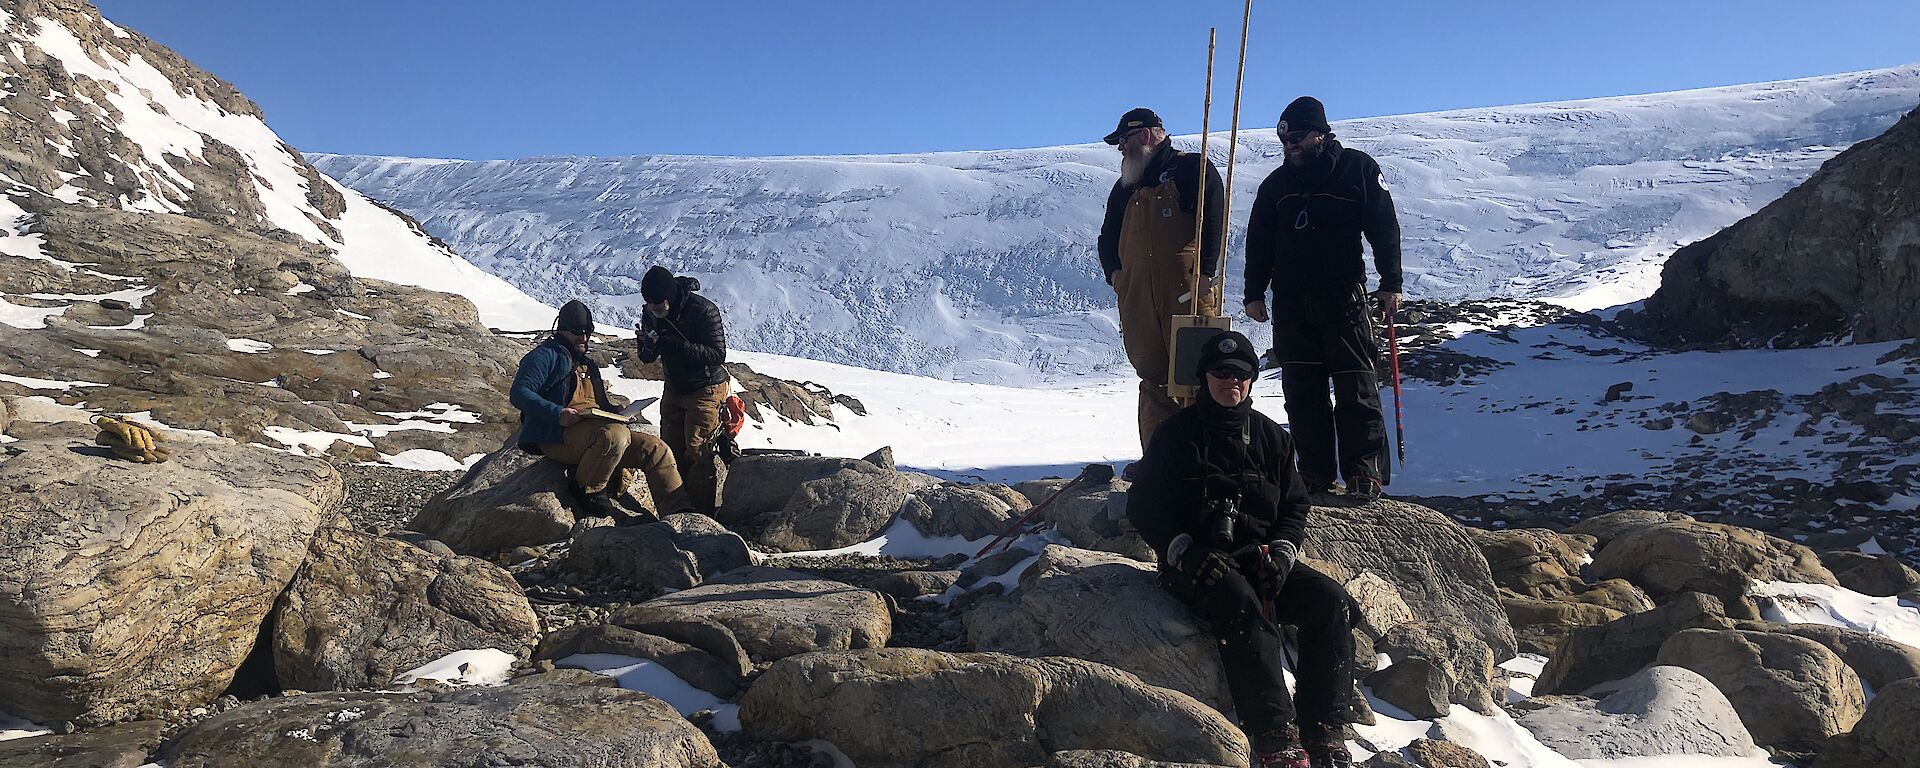 5 expeditioners stand and sit on some rocks in amongst the snow.  Snowy hills in the background